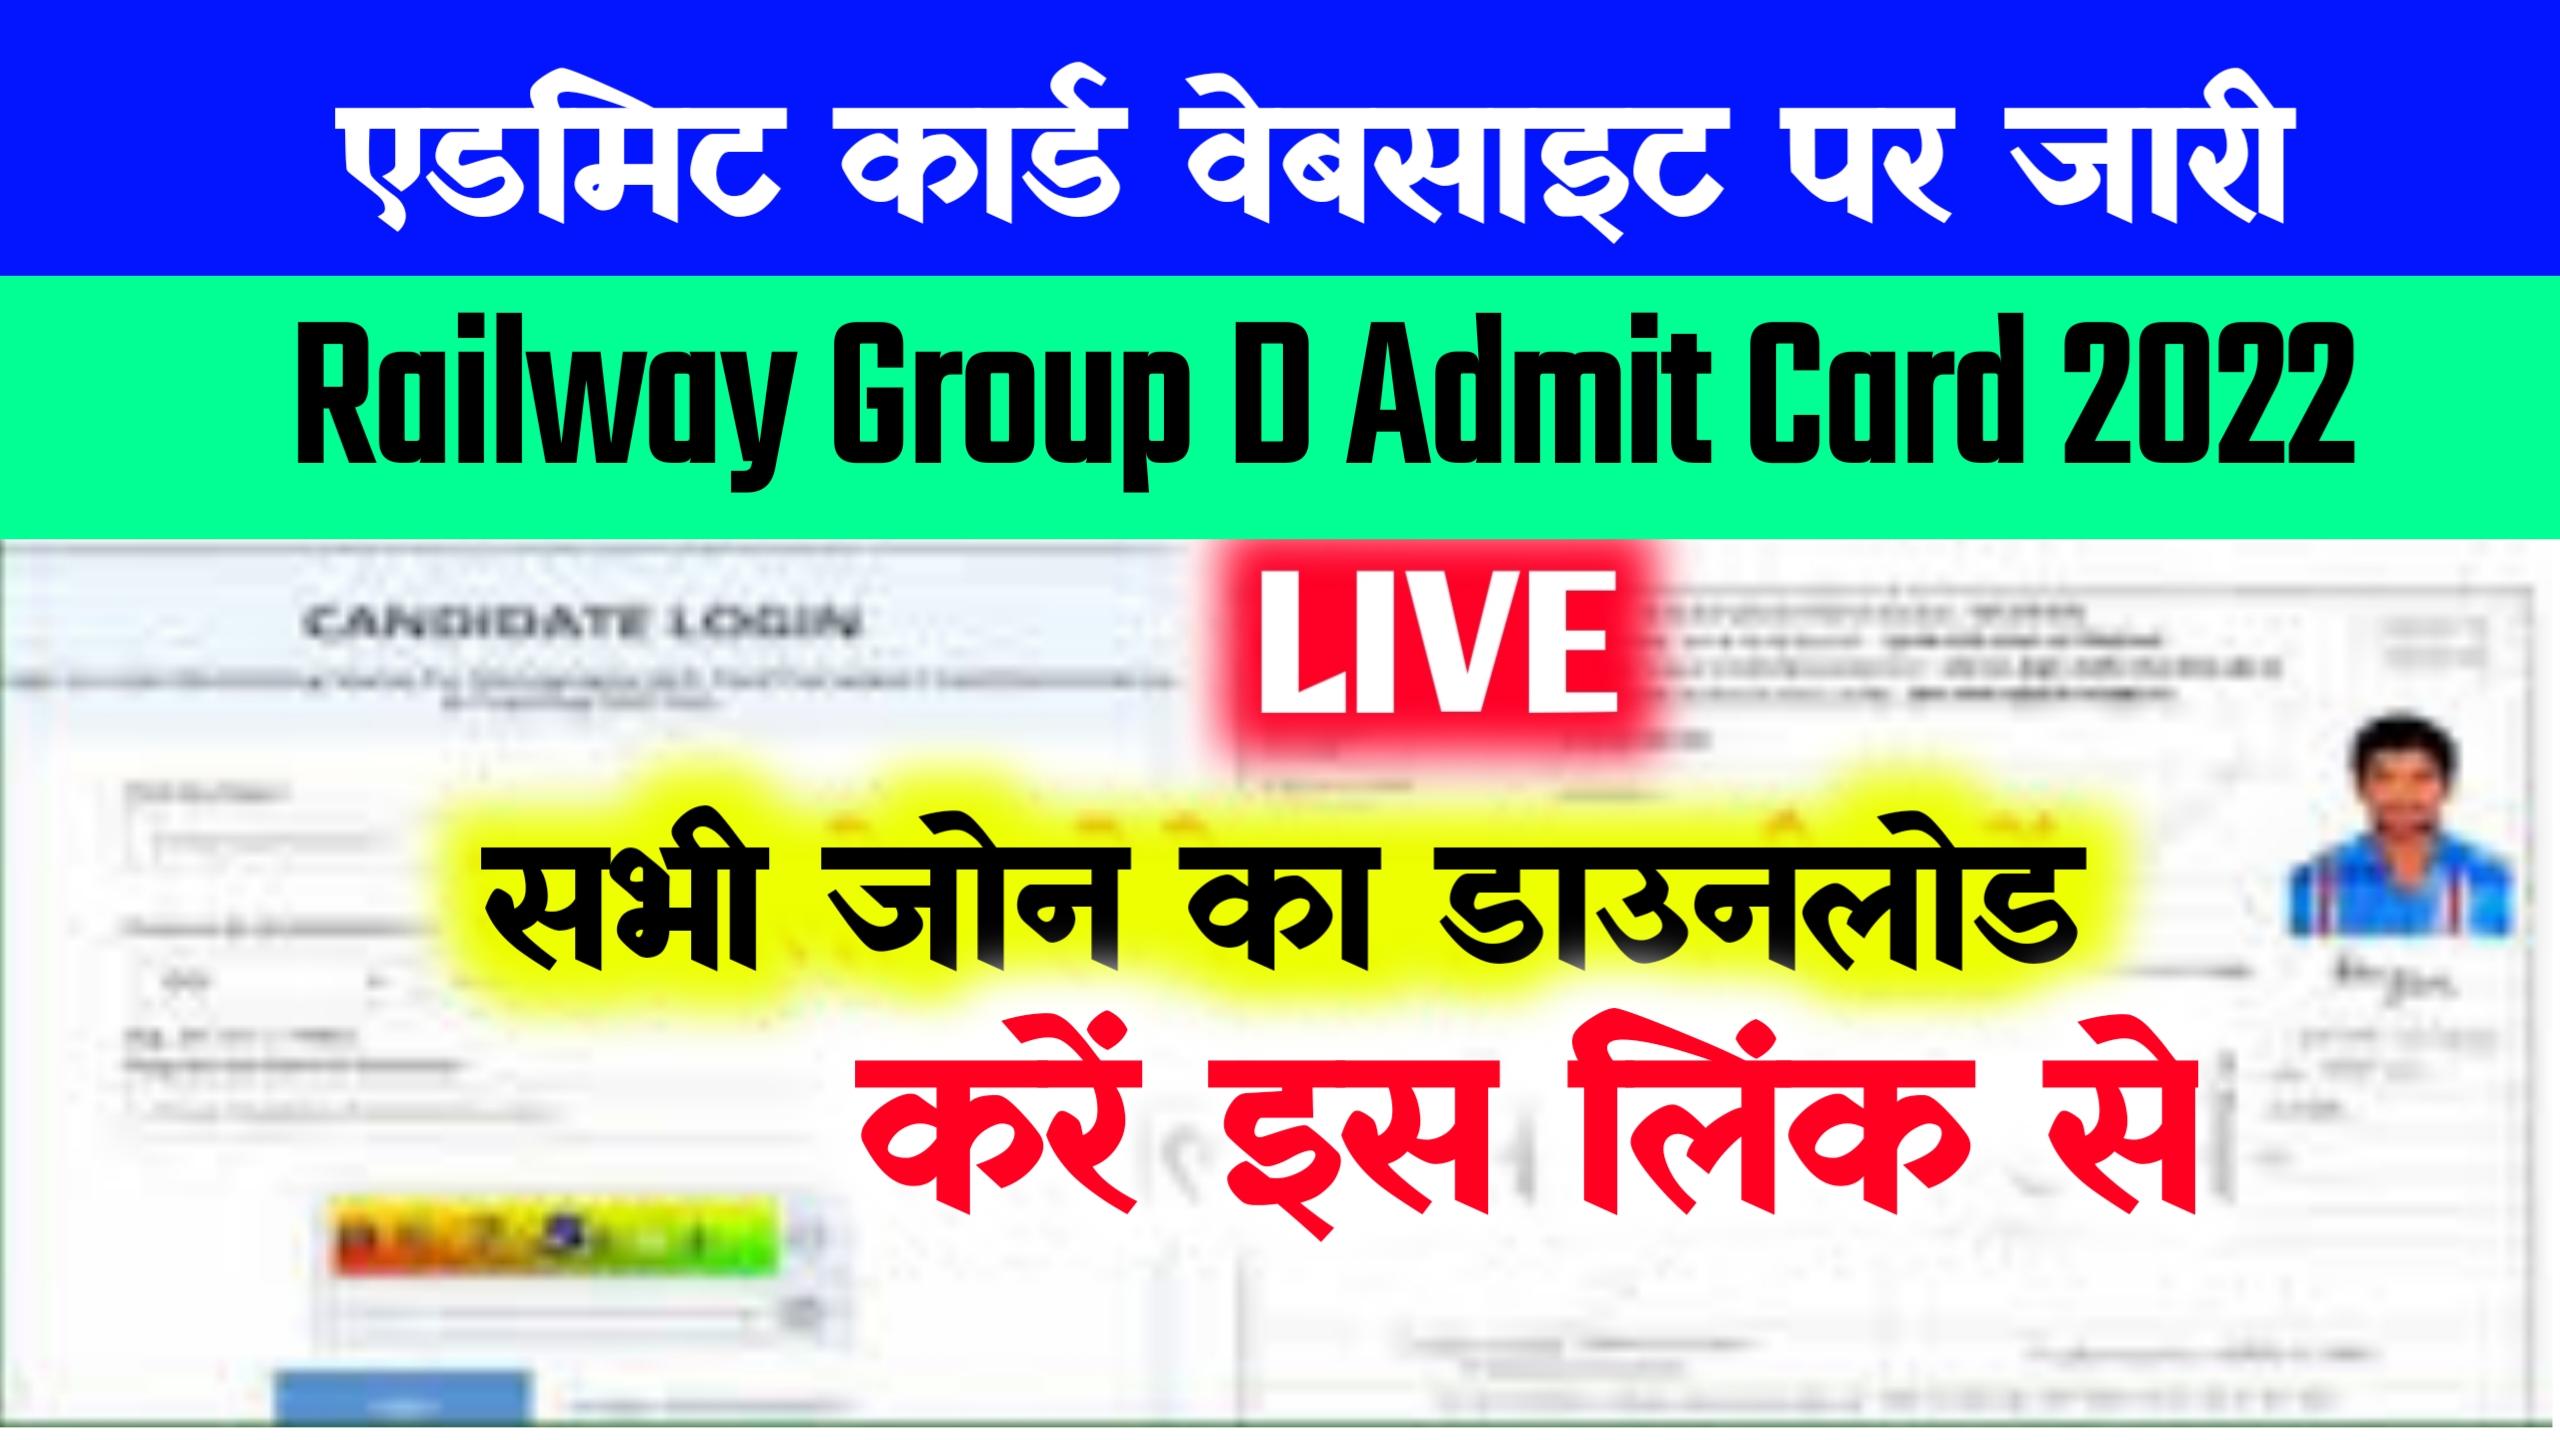 @rrbcdg.gov.in Railway Group D Admit Card 2022 Direct Link ~ Hall Ticket